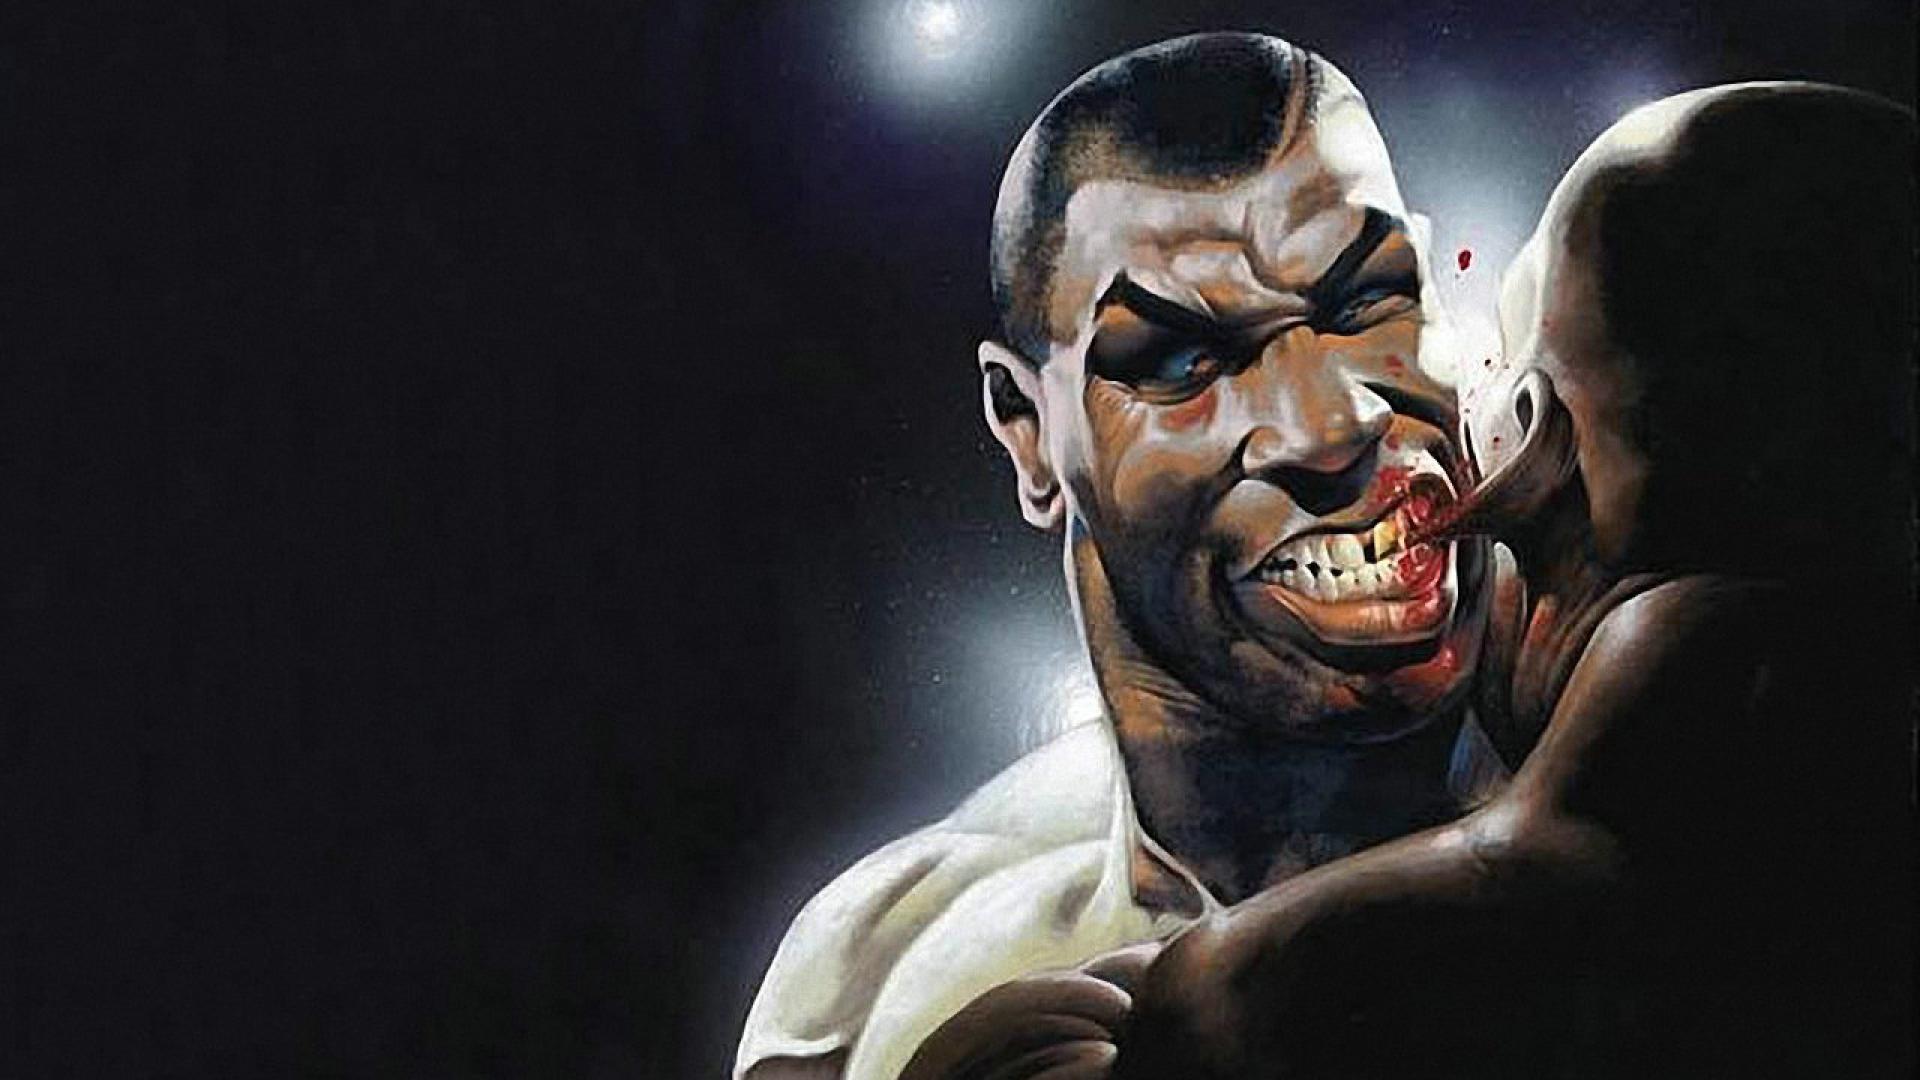 Mike Tyson Wallpaper Pictures